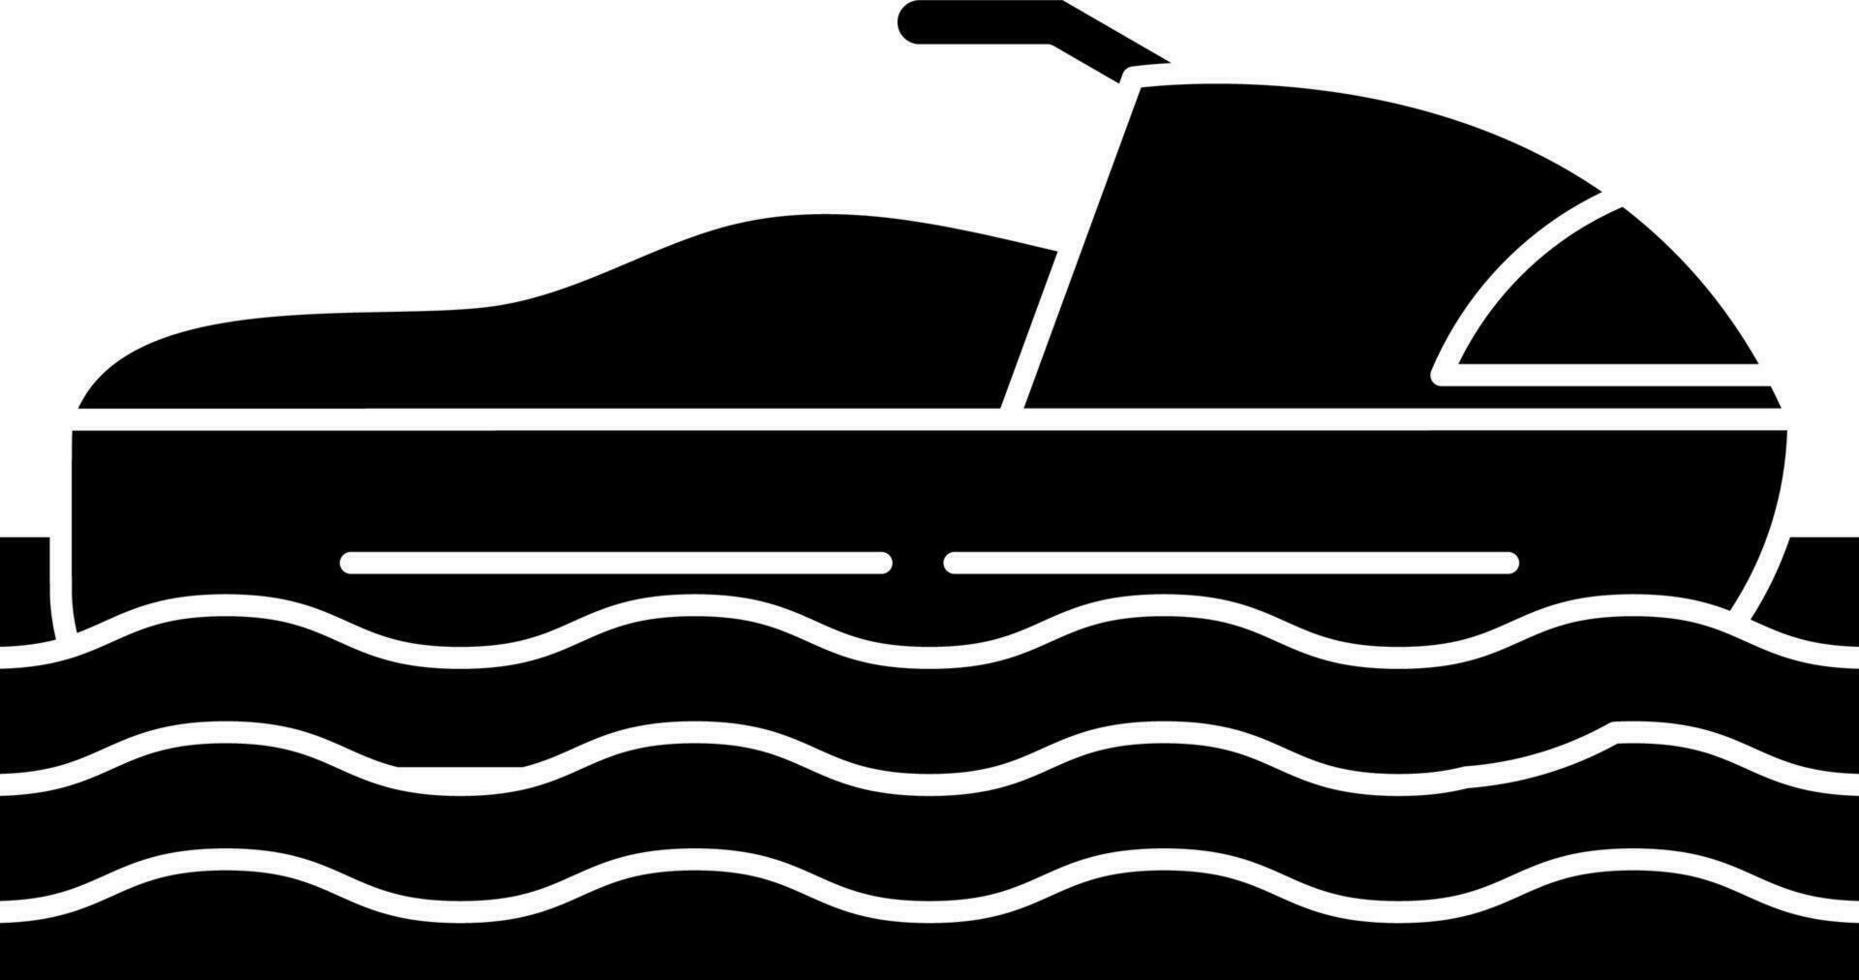 Snowmobile icon in Black and White color. vector